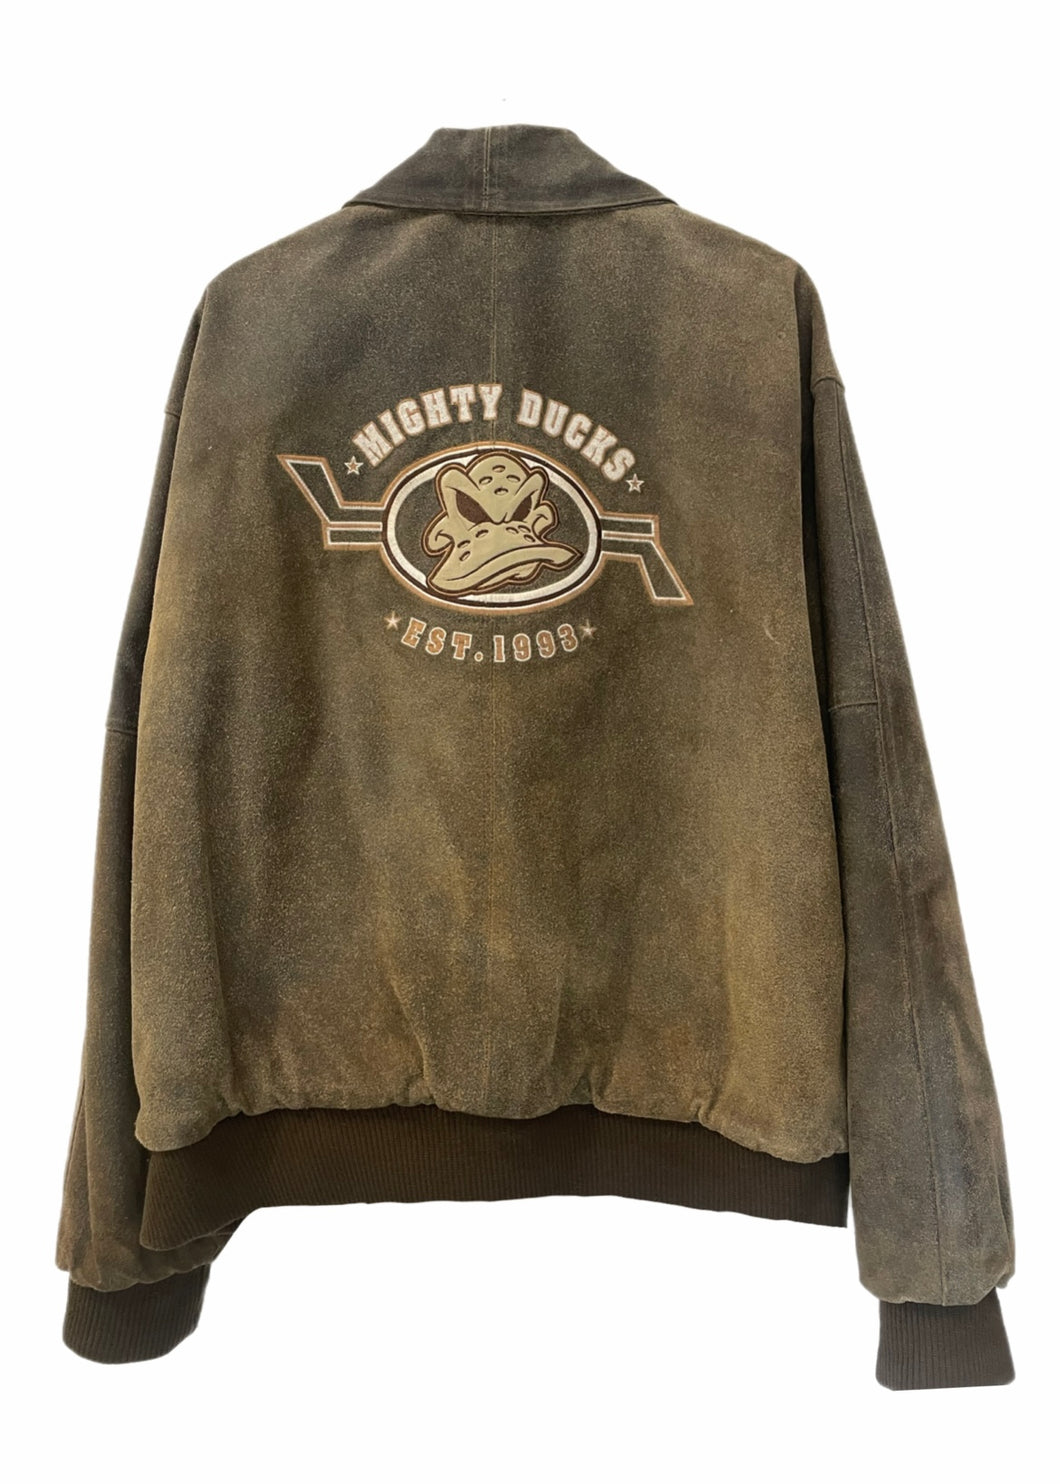 Anaheim Ducks, Hockey One of a Kind Vintage “Mighty Duck” Super Rare Find Leather Jacket